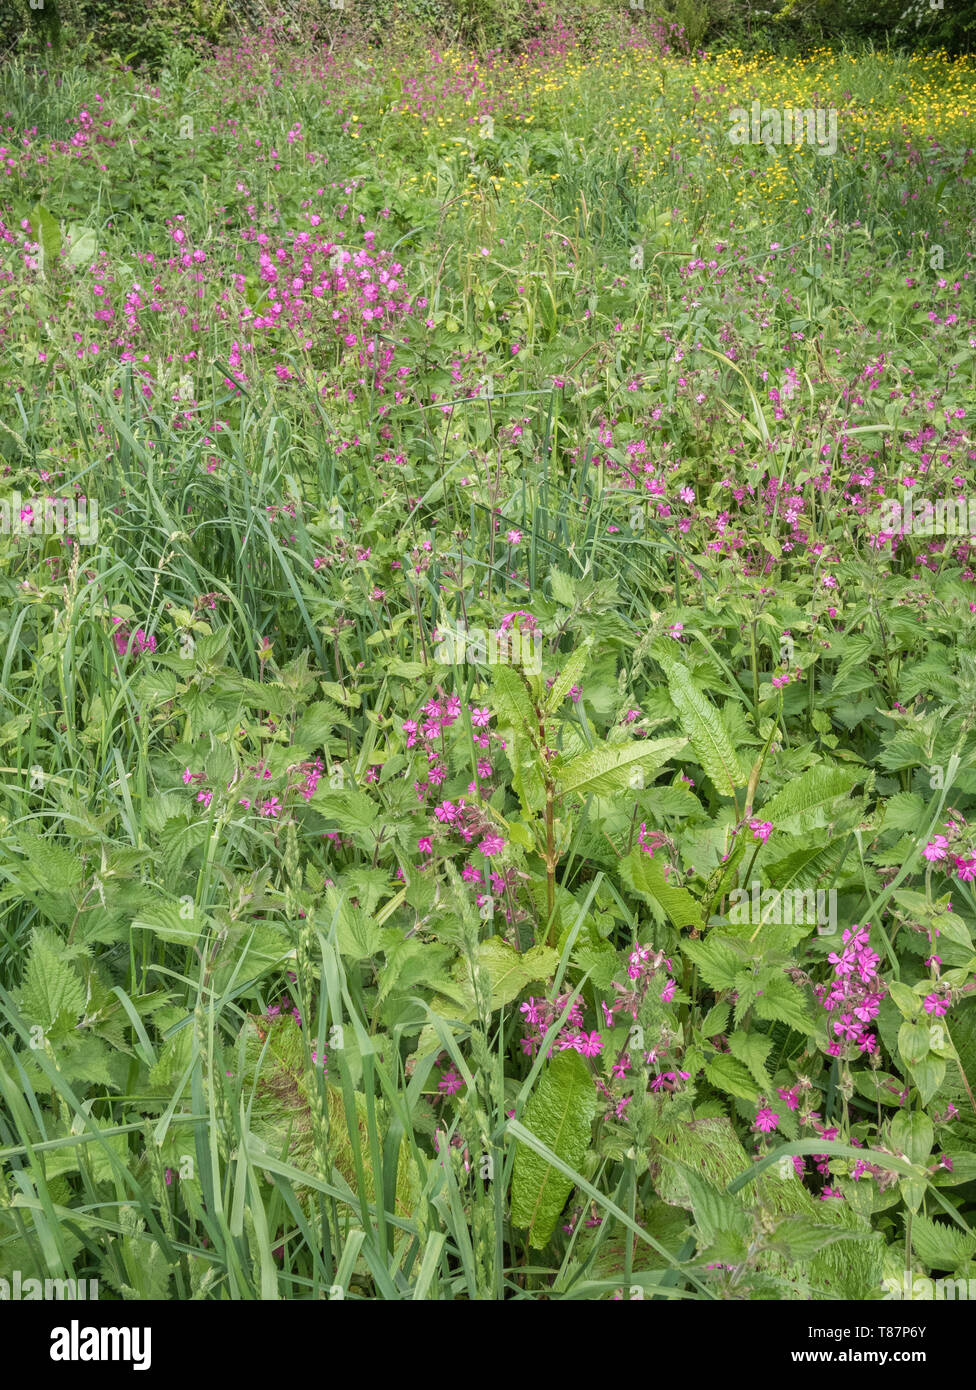 Mass of Red Campion / Silene dioica with Buttercups / Ranunculus repens, plus Docks. Stock Photo